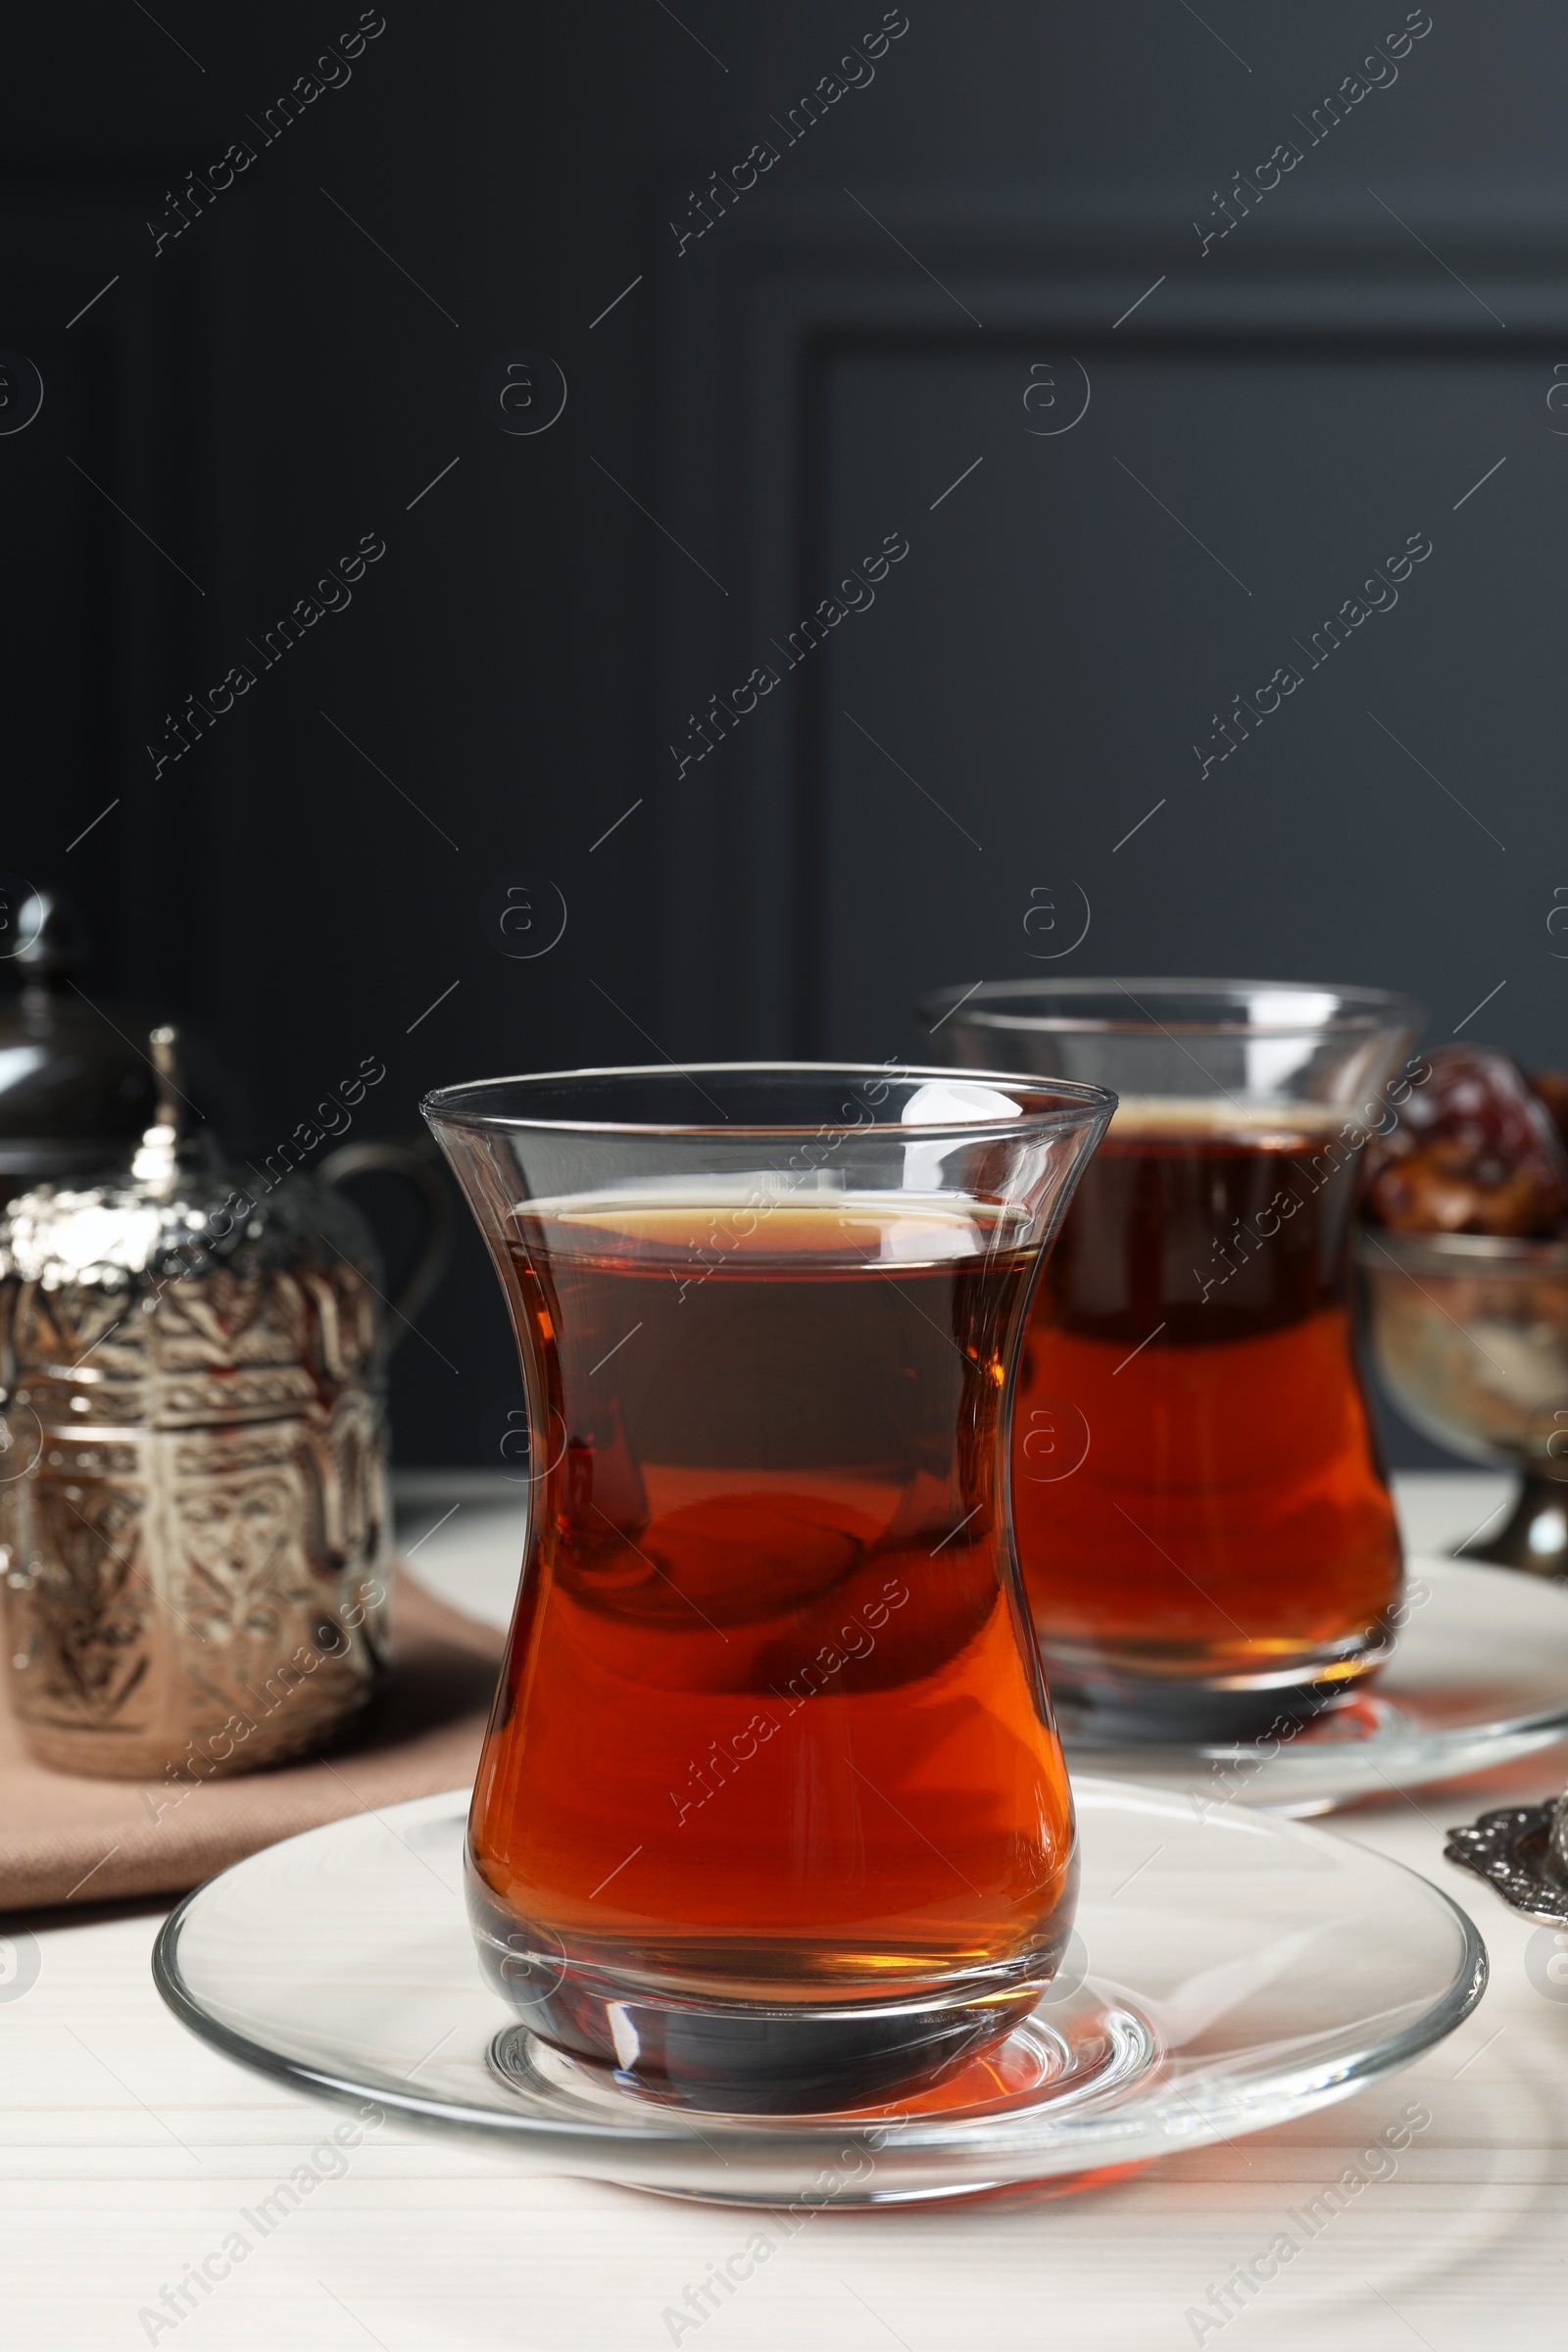 Photo of Glasses of tea and vintage tea set on white wooden table